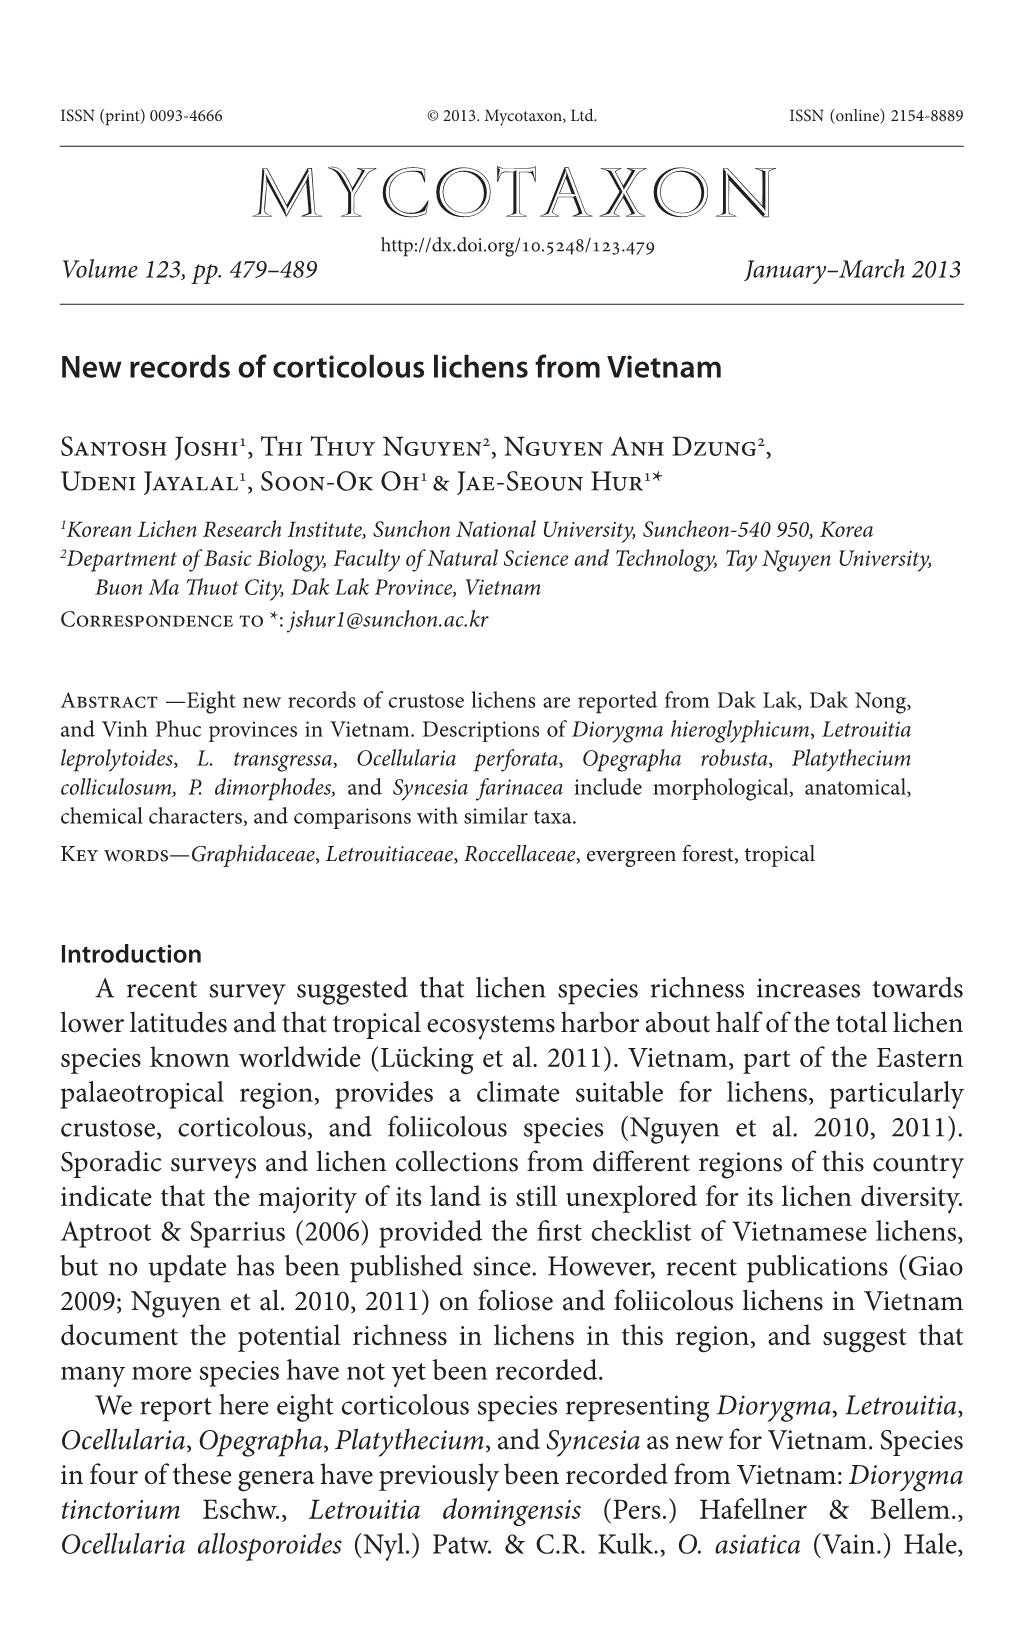 New Records of Corticolous Lichens from Vietnam